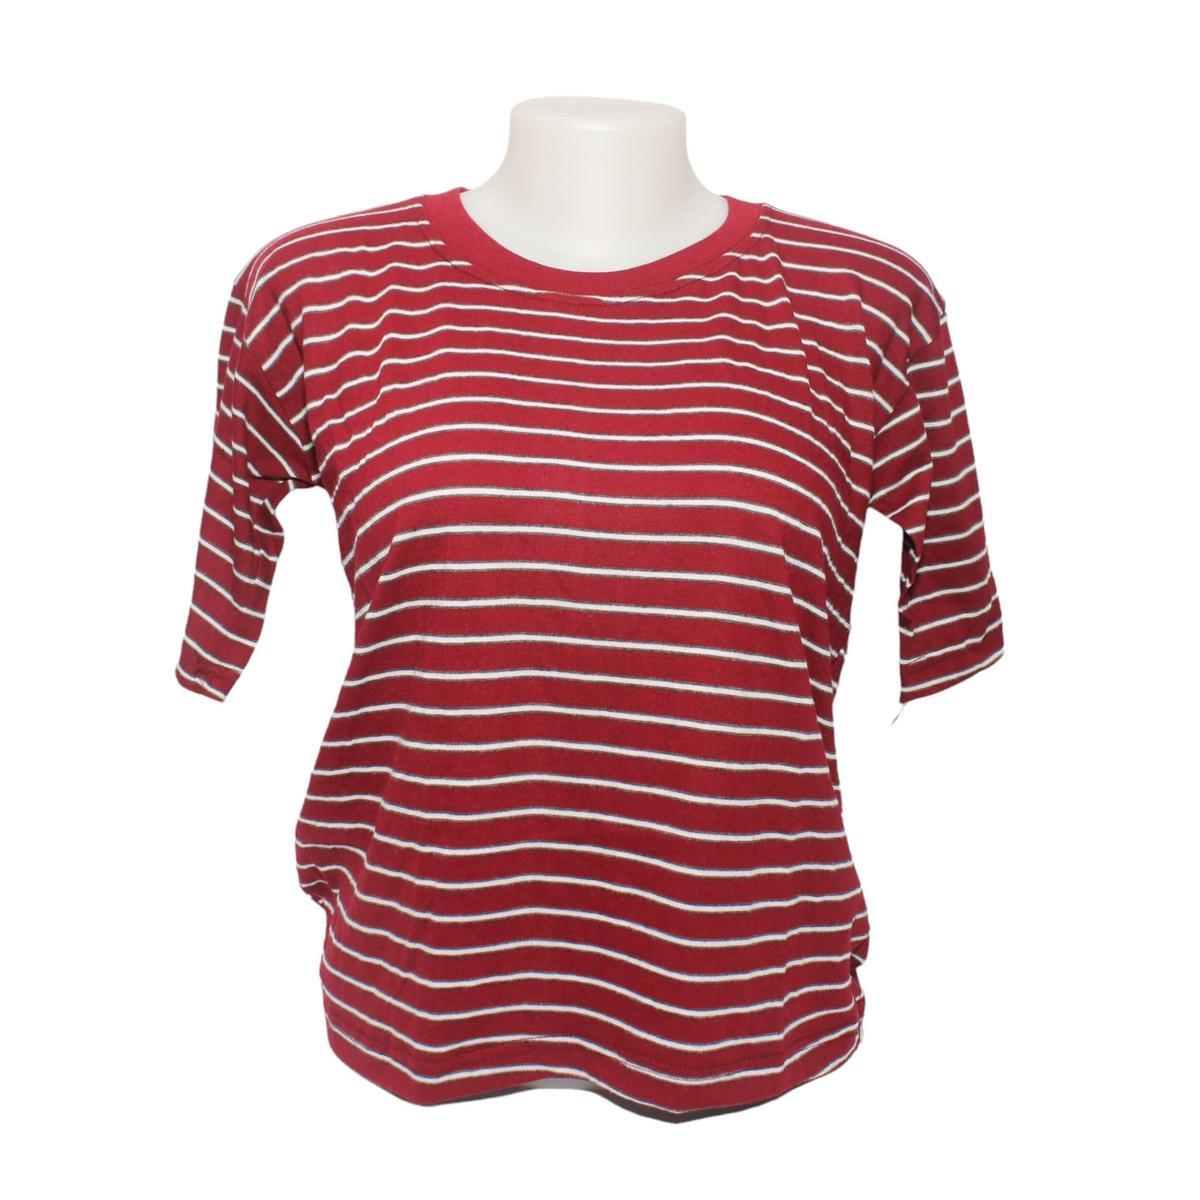 mix red lining design t shirt for women